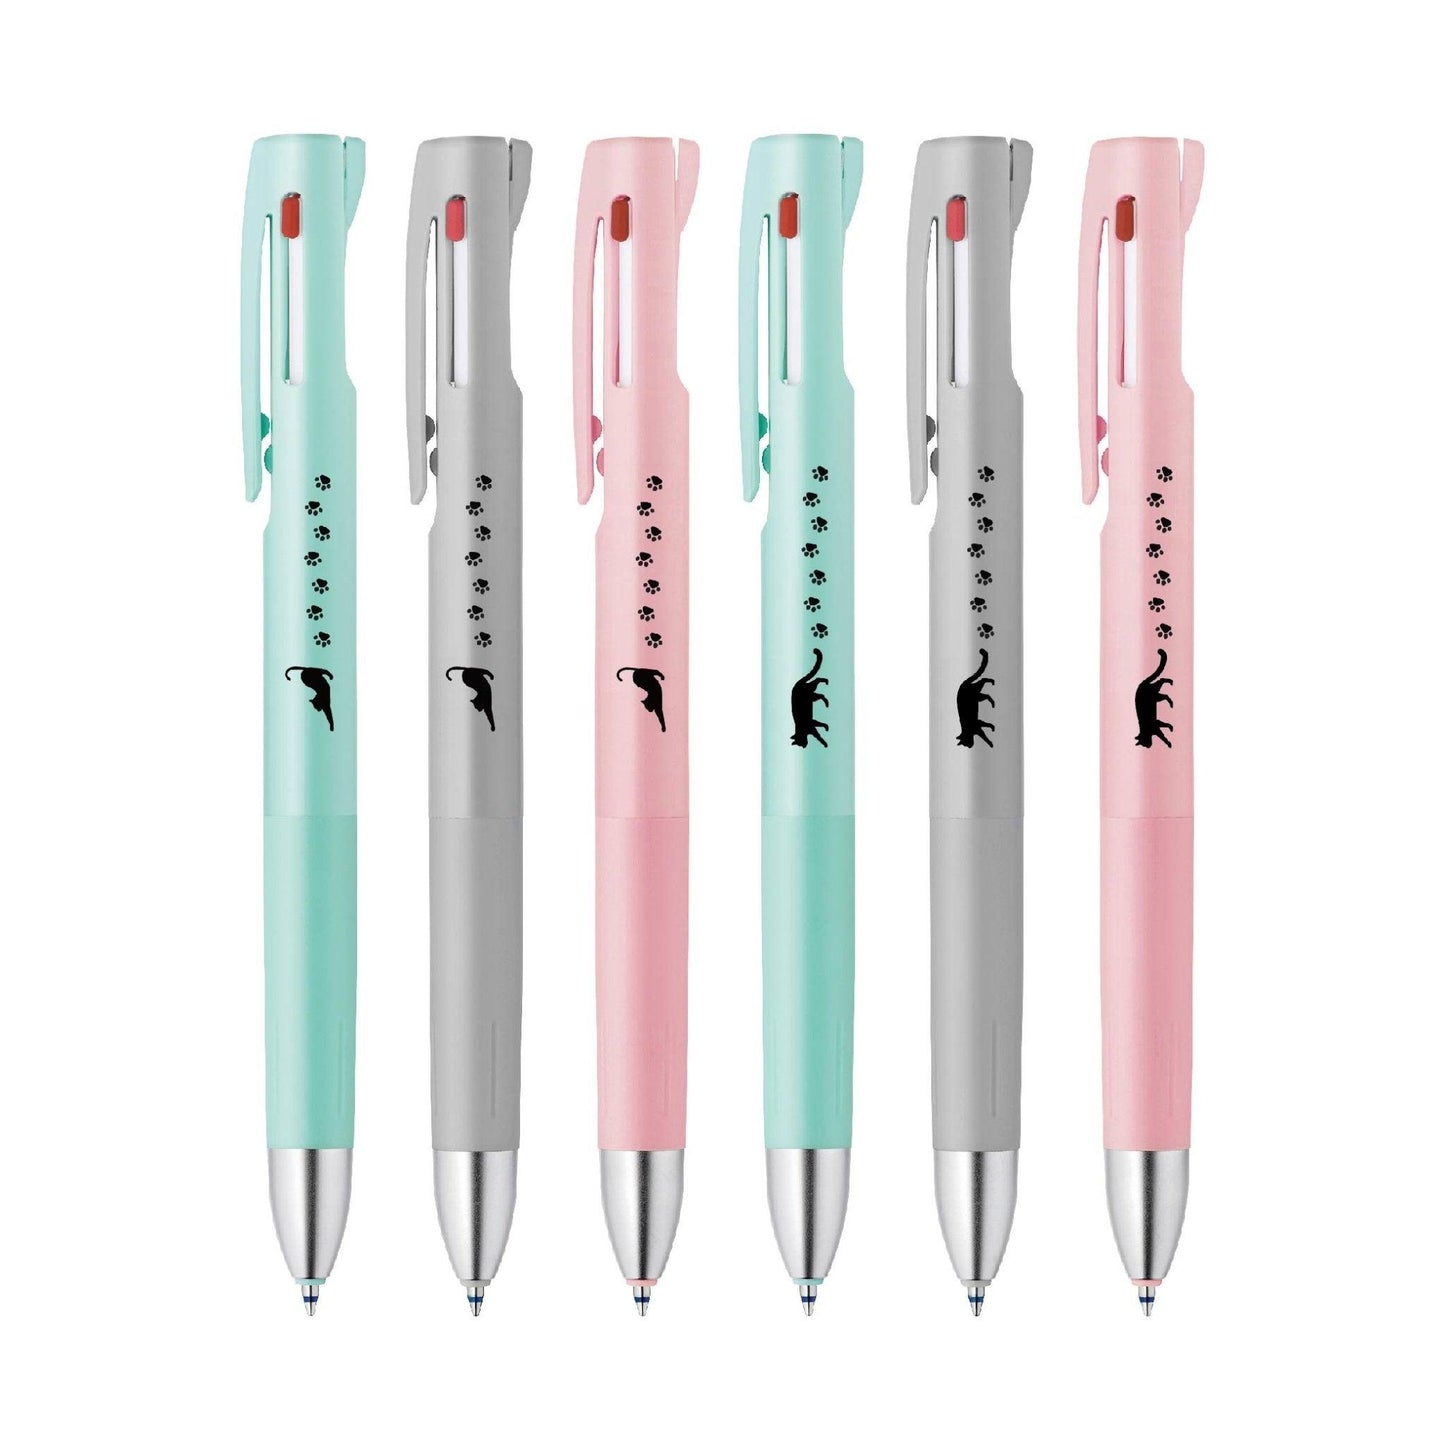 Zebra B3AS88 BLEN series three-color limited limited 0.5MM oil pen three-color pen cat stretches cat walking - CHL-STORE 